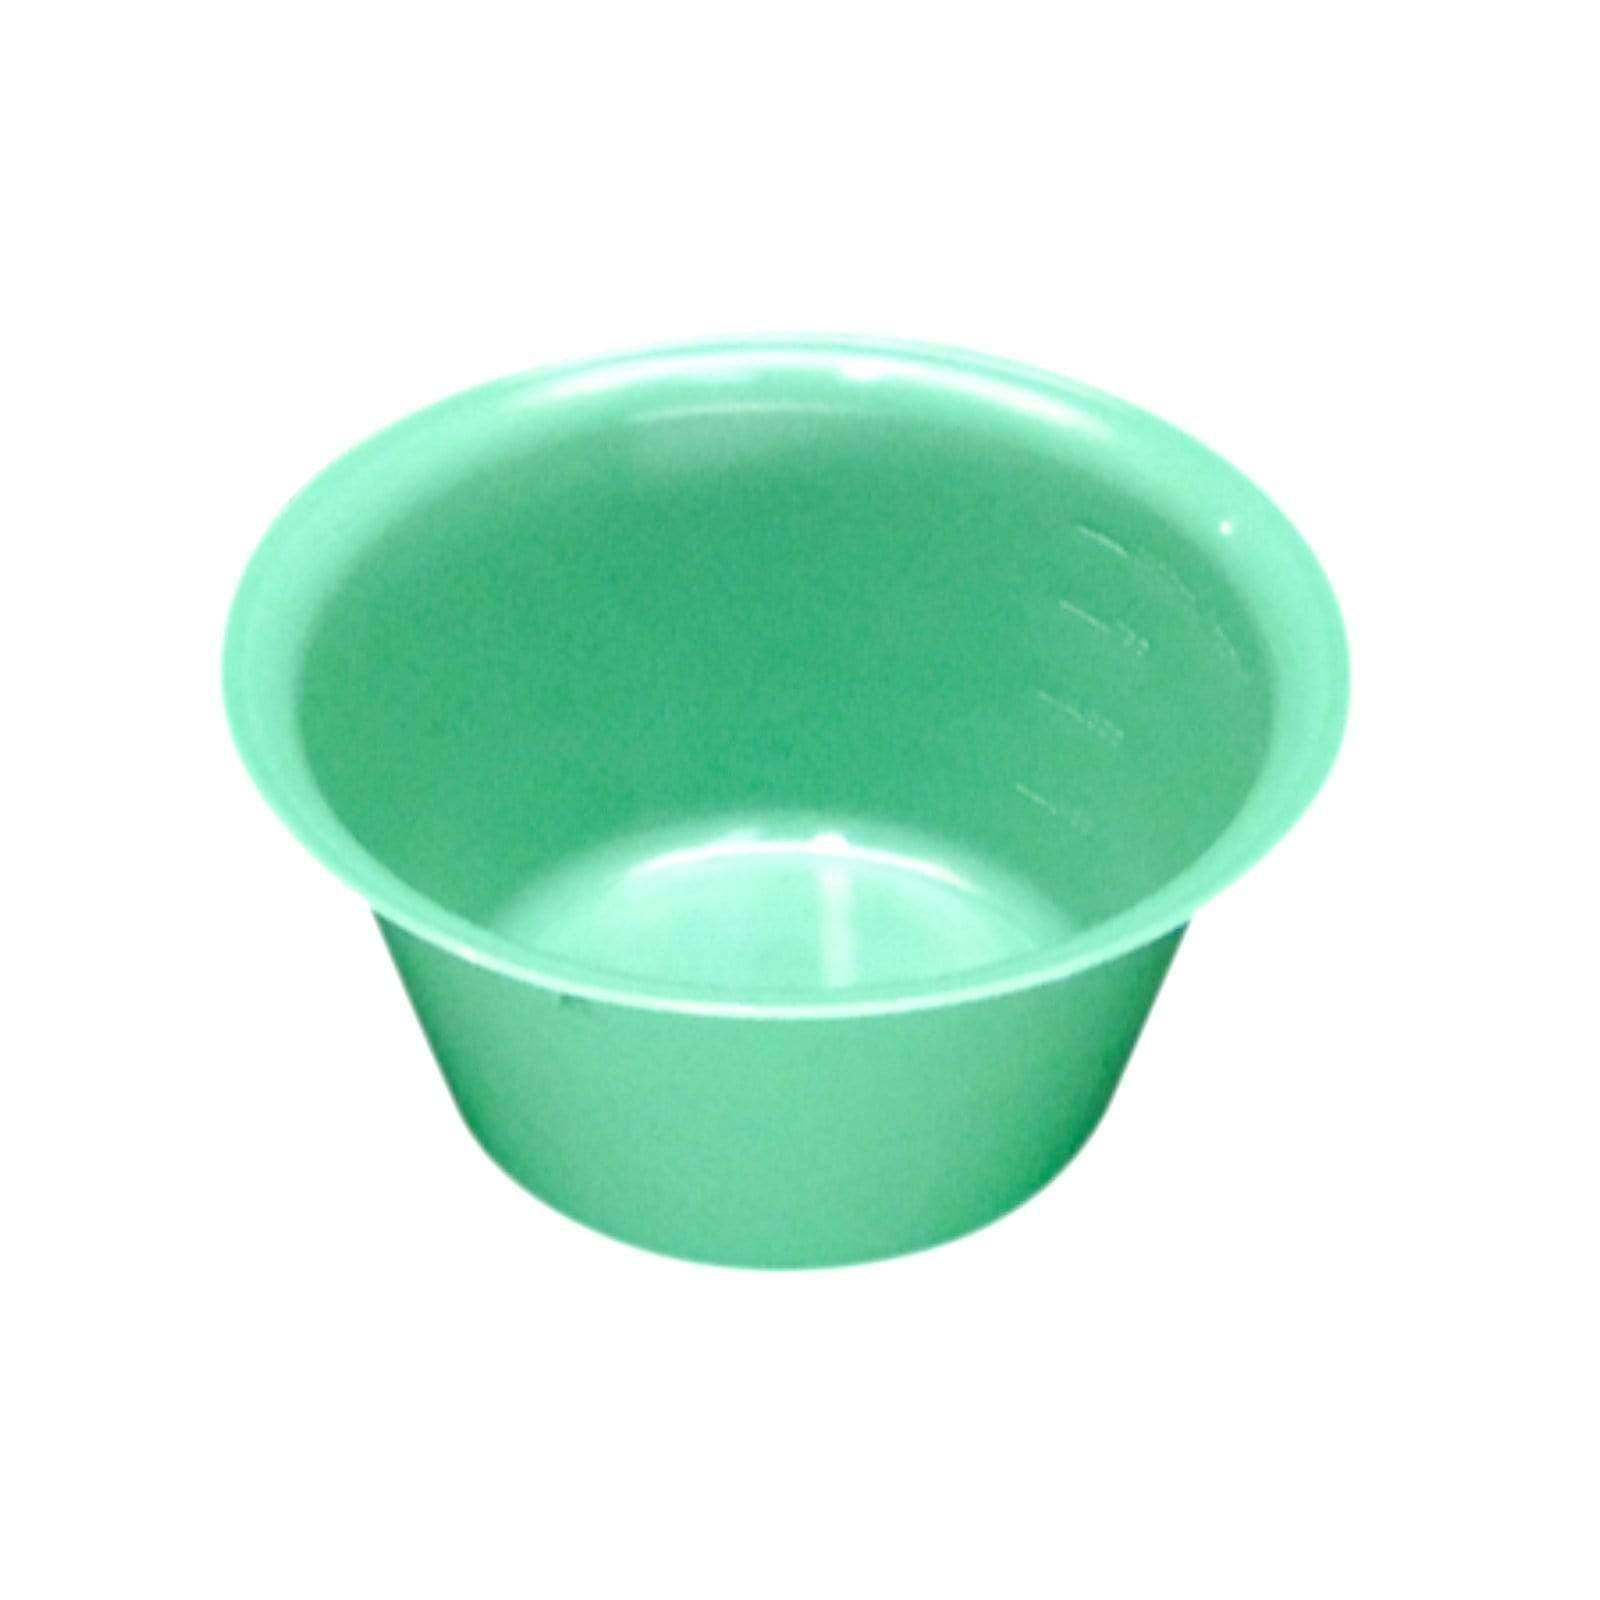 Bydand Medical Surgical Instruments 1000ml ULTRA Bowl